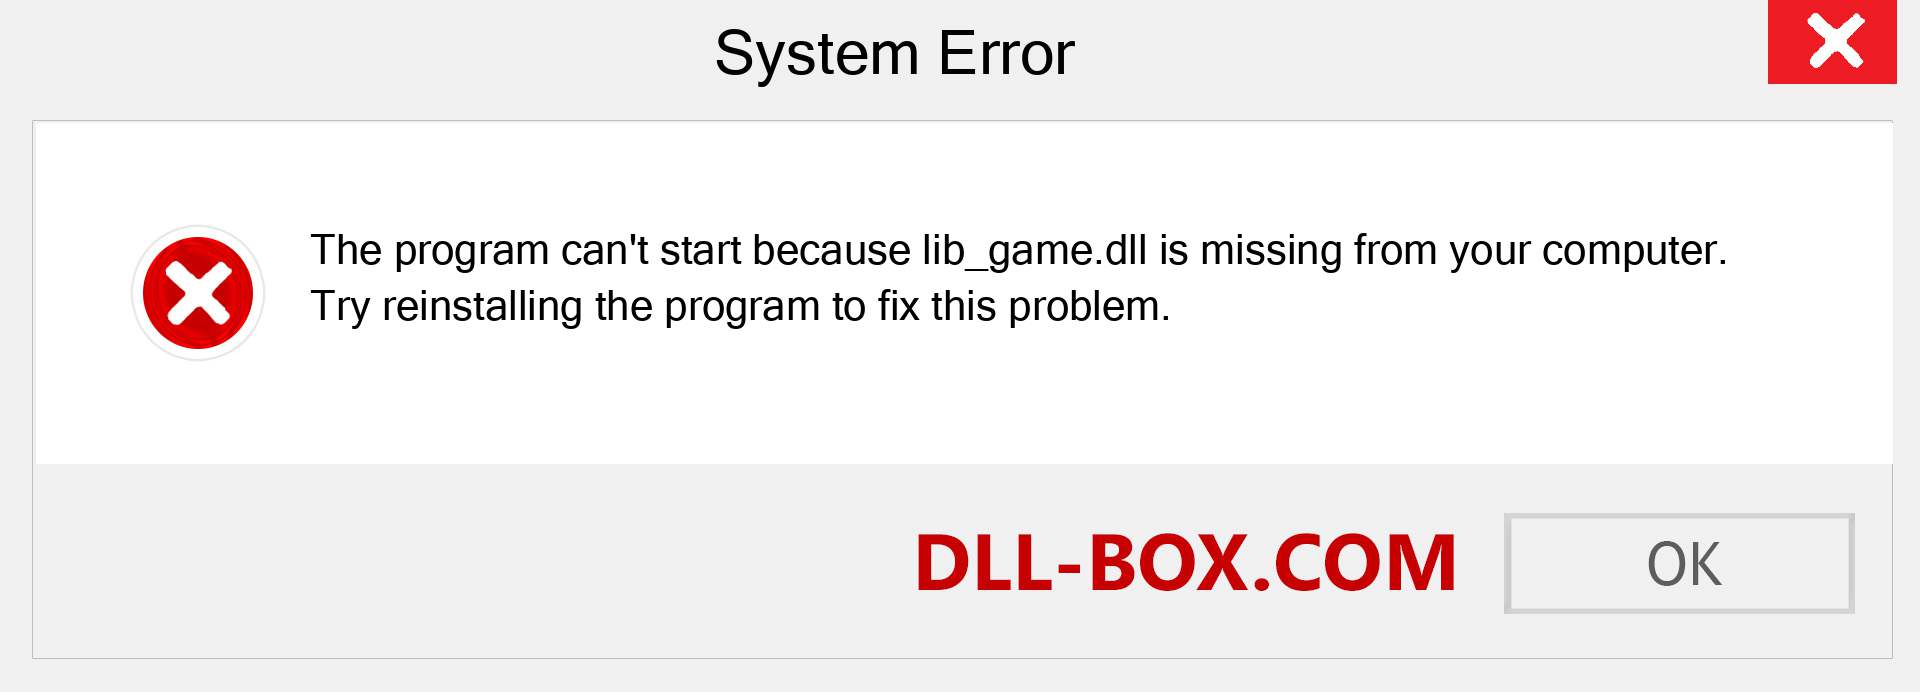  lib_game.dll file is missing?. Download for Windows 7, 8, 10 - Fix  lib_game dll Missing Error on Windows, photos, images